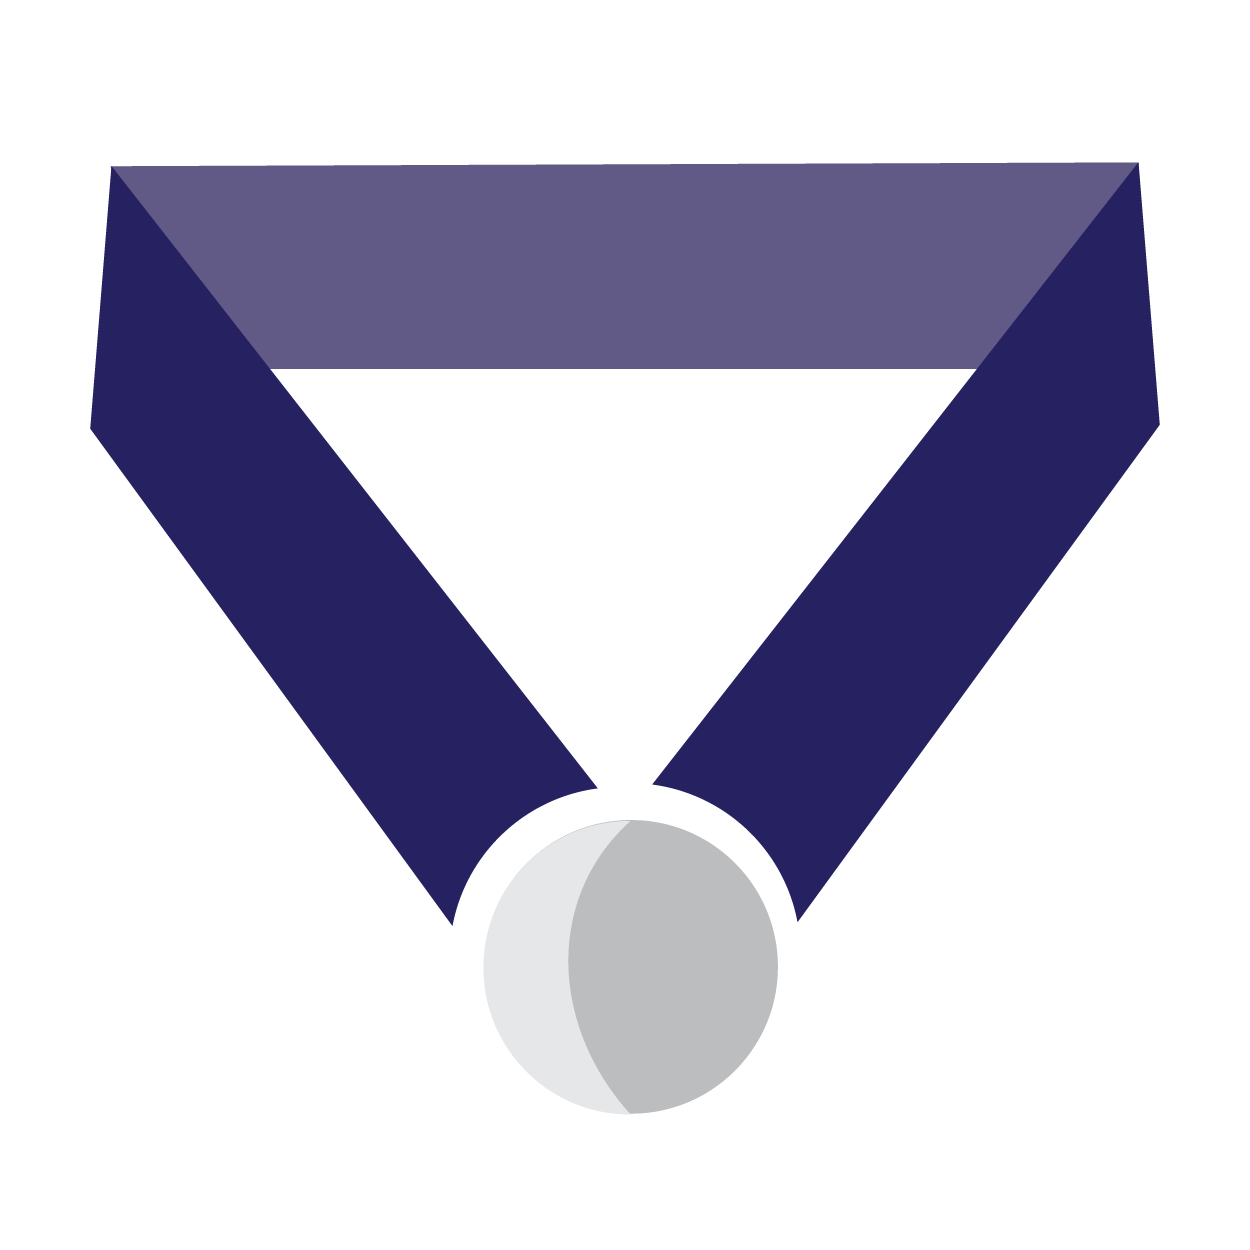 A digital illustration featuring a stylized, purple shield-like emblem with a central silver medal and two horizontal blue banners.